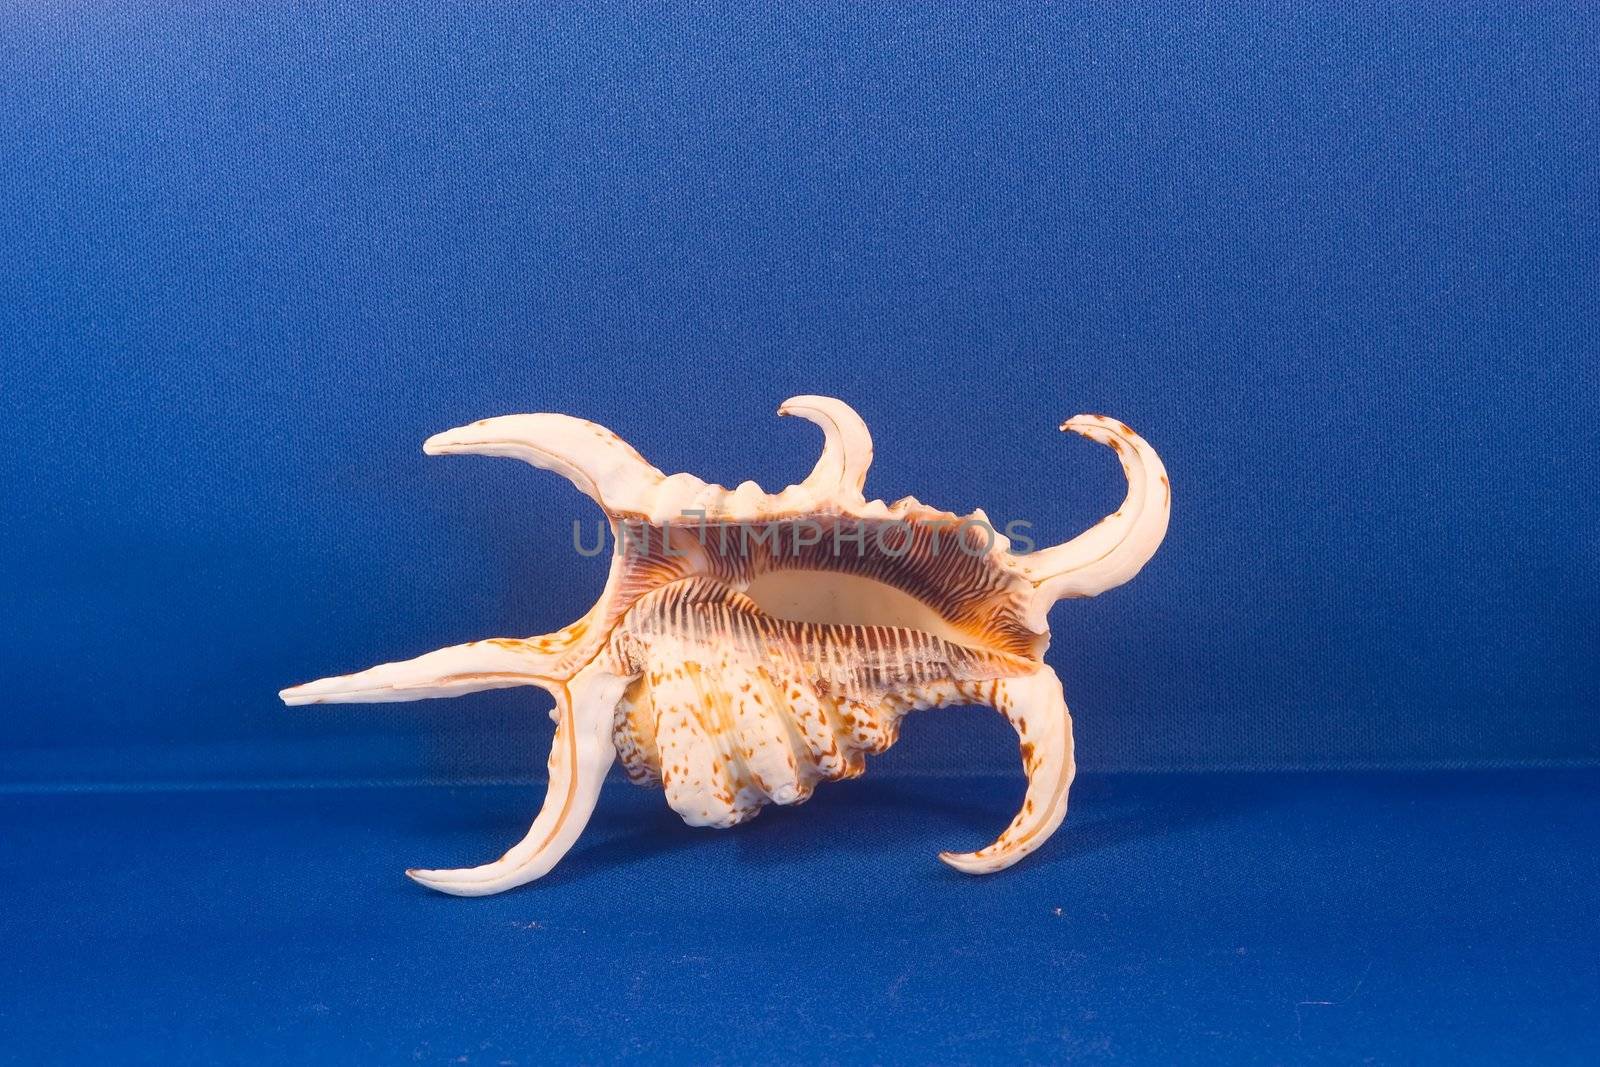 A seashell is the common name for a hard, protective outer layer created by a marine organism or sea creature. In addition to seashells, there are also several different types of non-marine animal shell in the natural world.